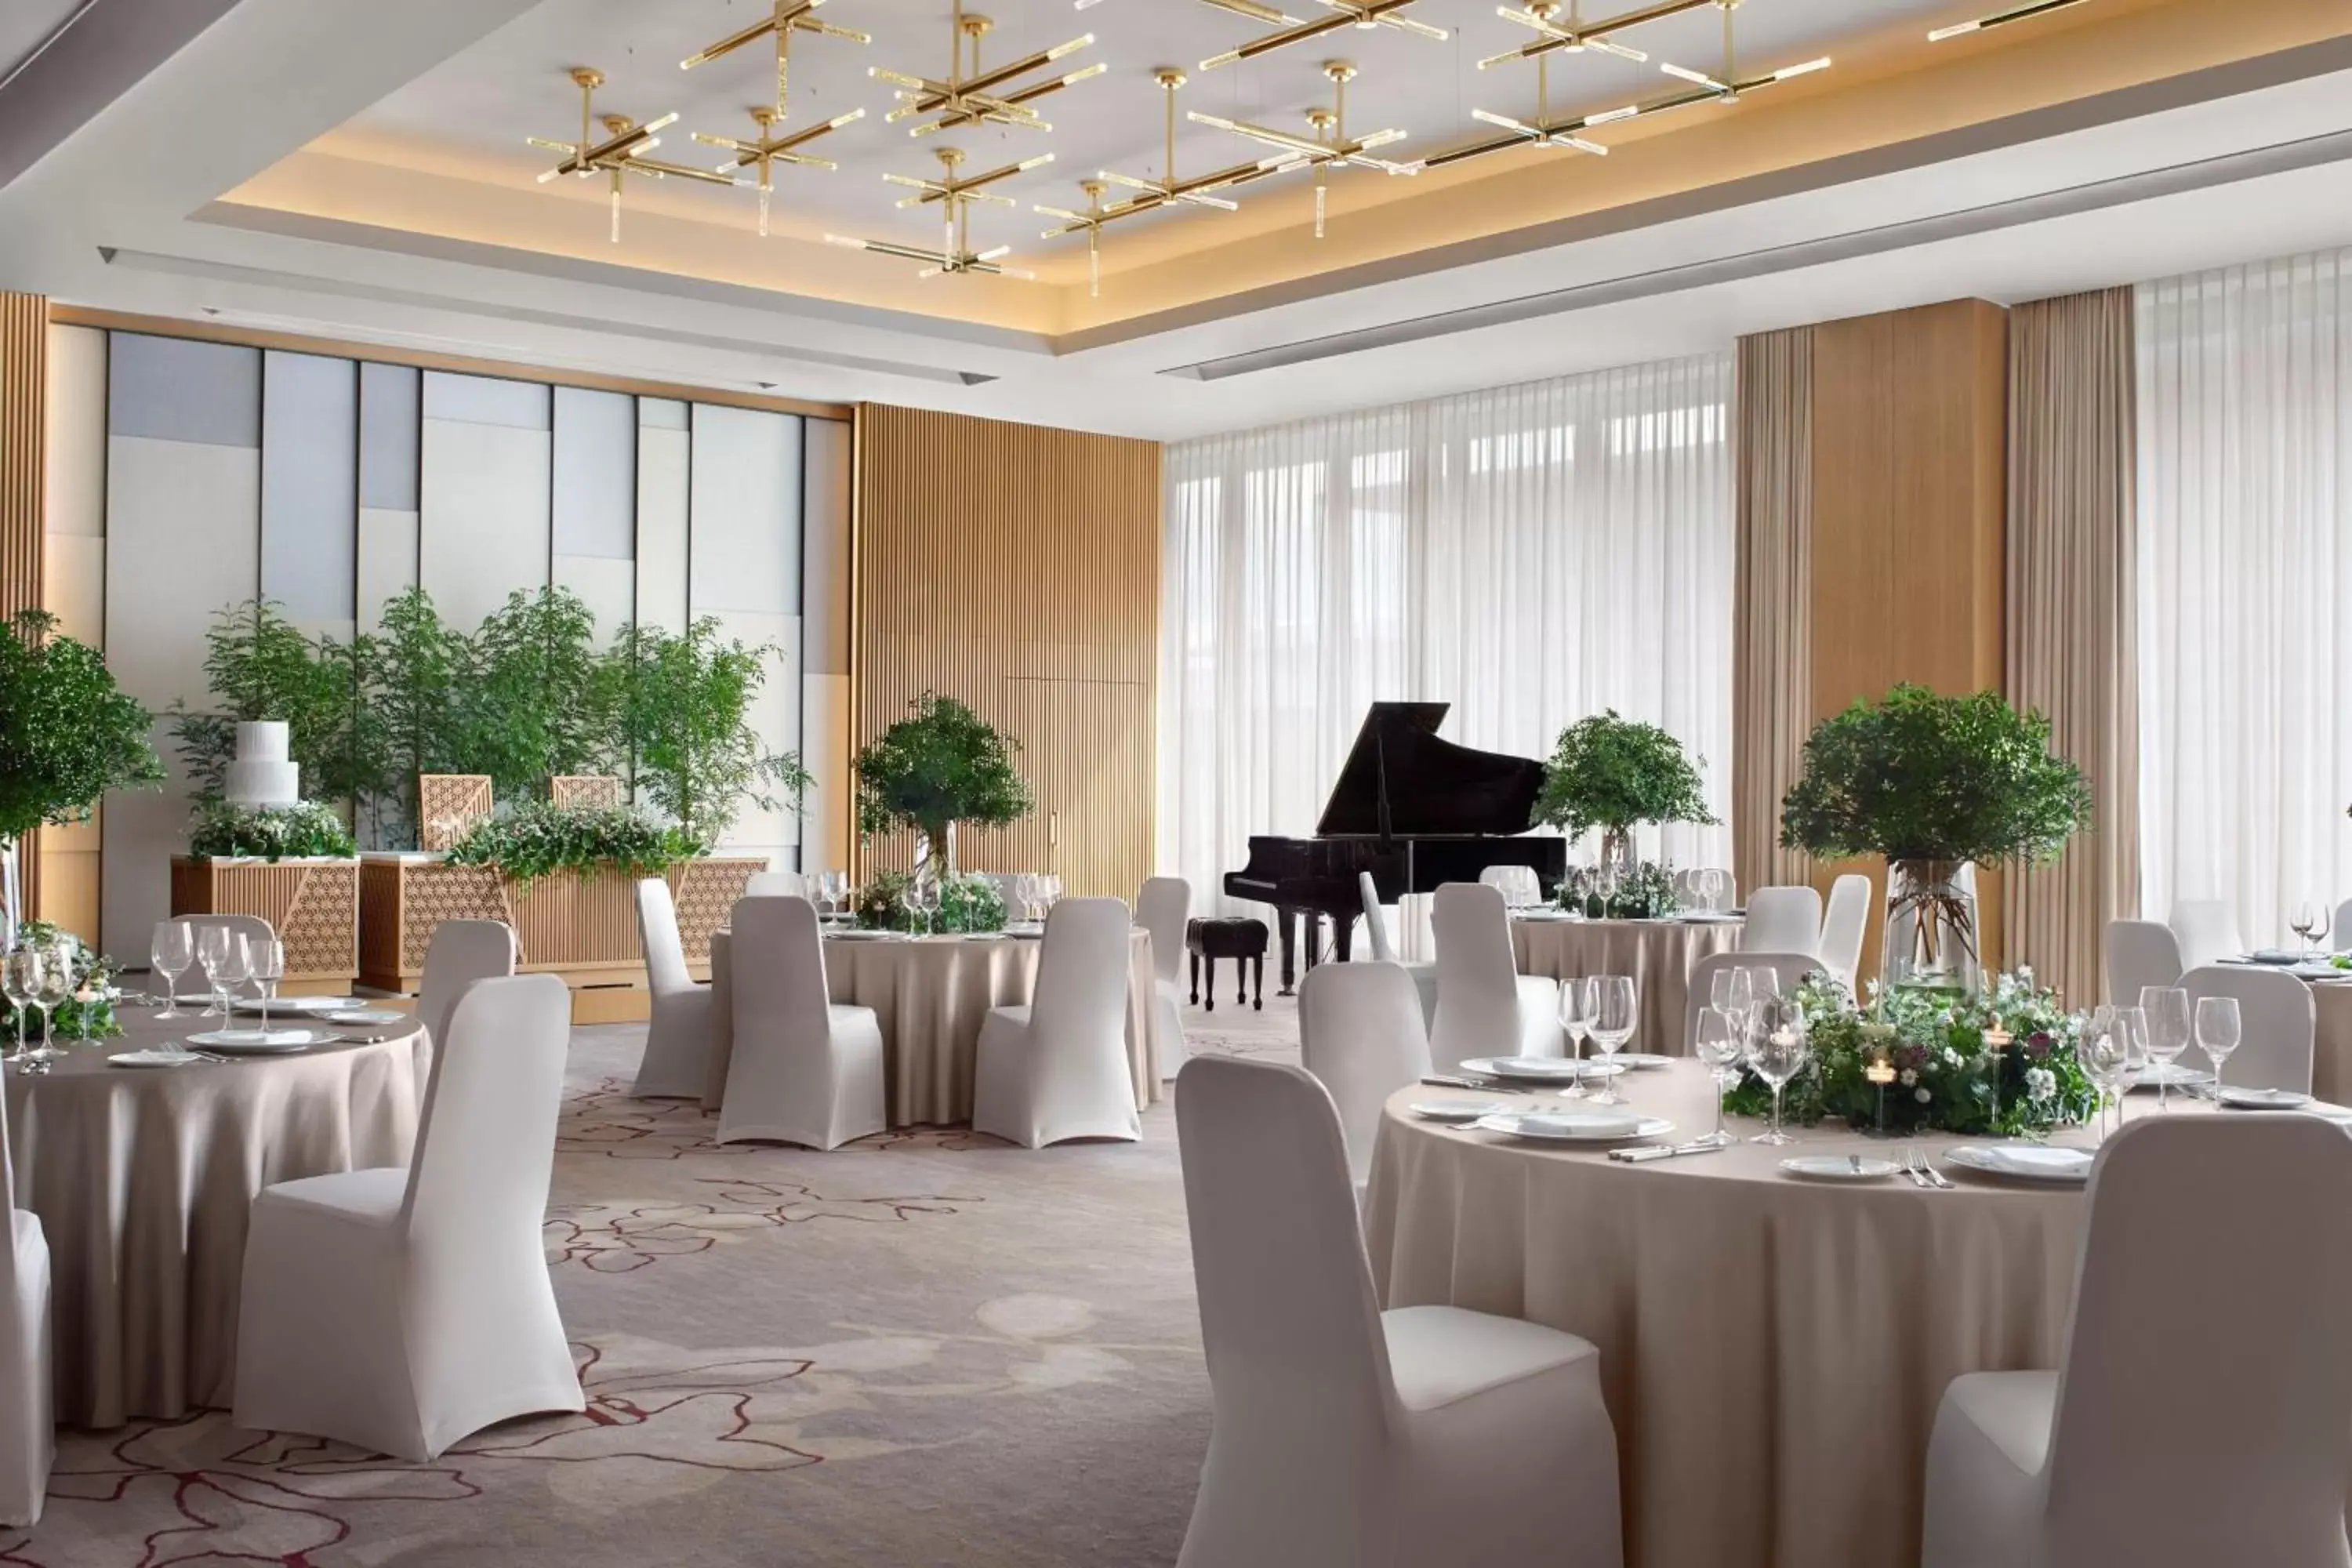 Meeting/conference room, Banquet Facilities in JW Marriott Hotel Nara